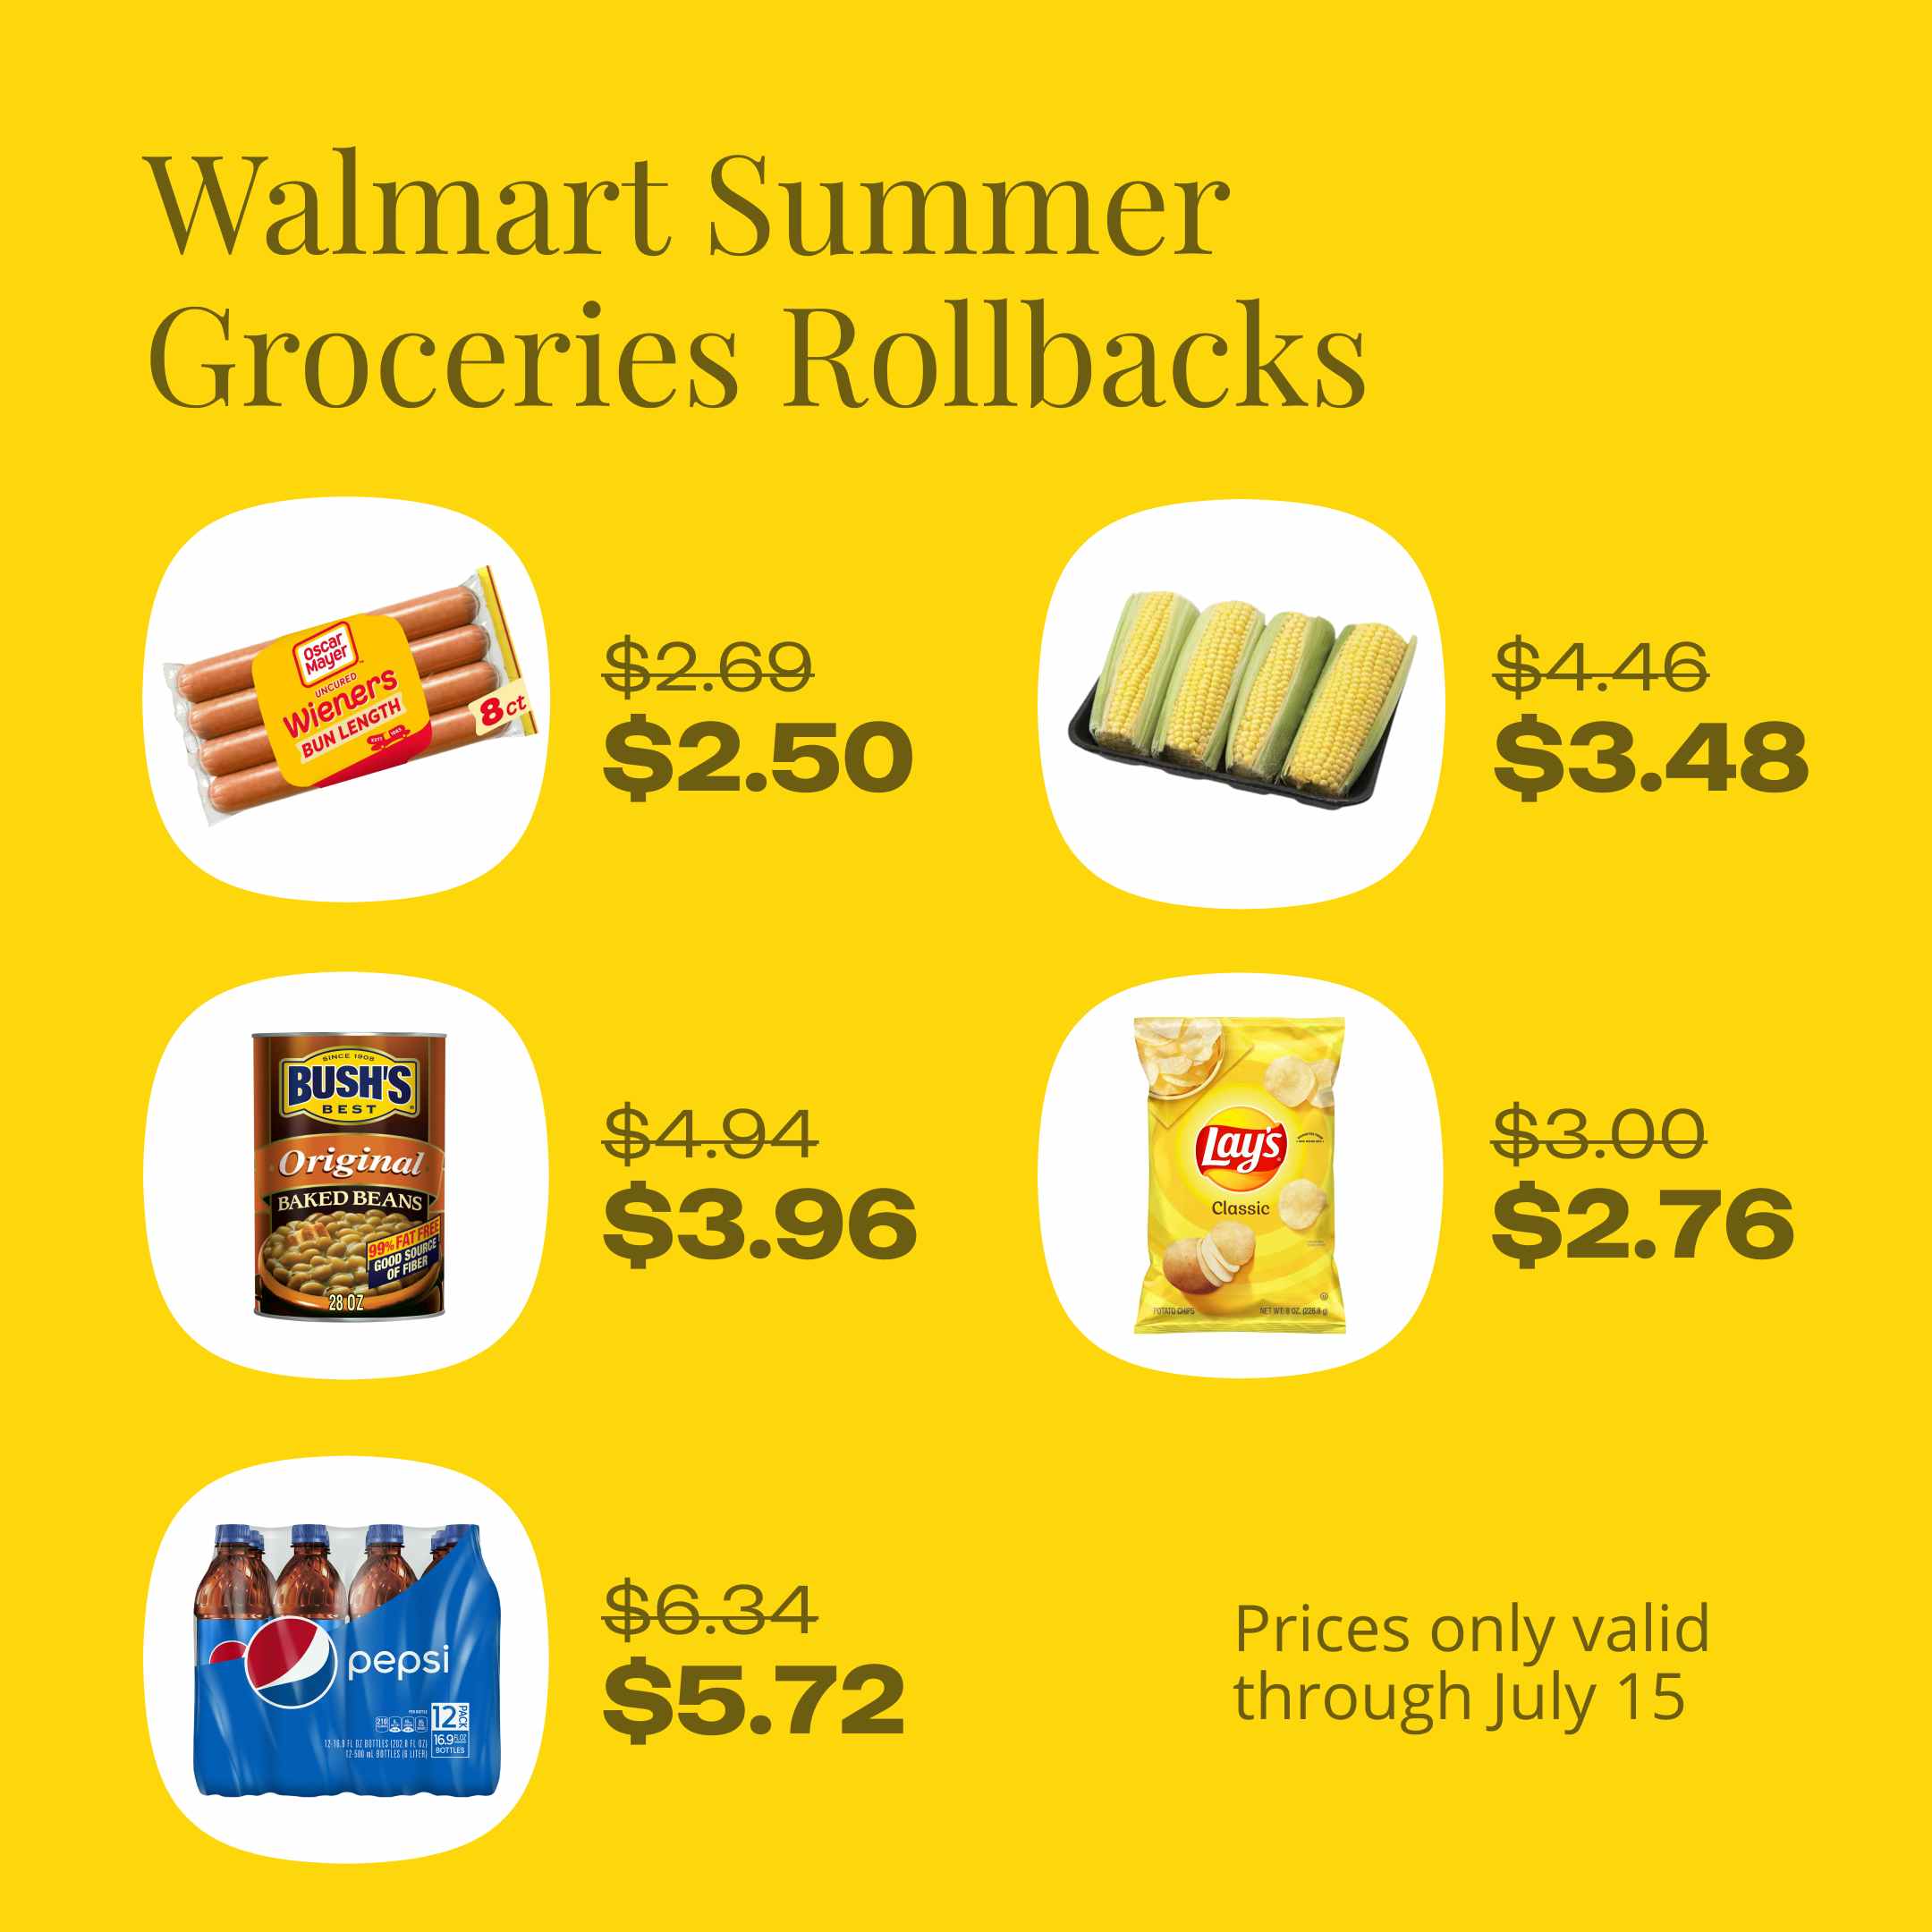 Walmart summer grocery rollbacks: Oscar Mayer Hot Dogs = $2.50, Corn on the Cob = $3.48, Bush's Baked Beans = $3.96, Lay's Chips = $2.76, Pepsi 12-Pack = $5.72